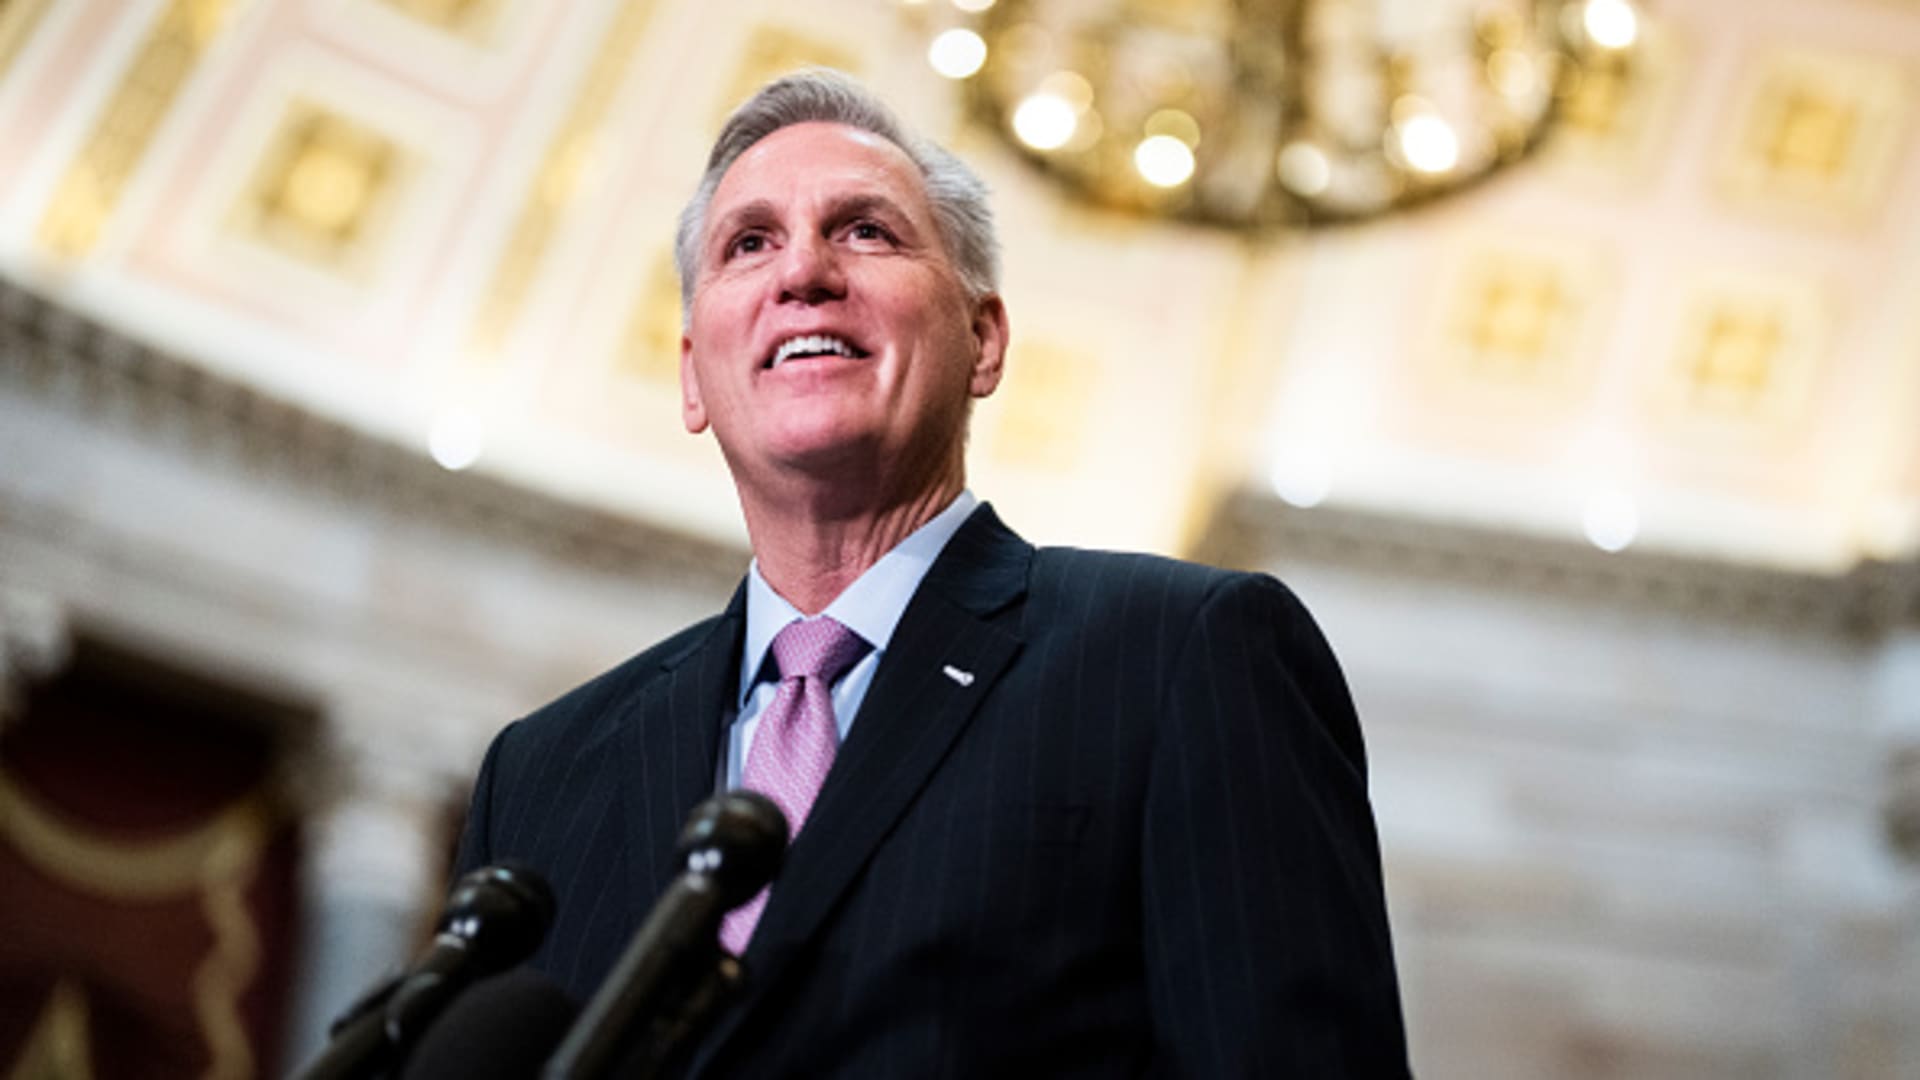 Watch live: U.S. House Speaker Kevin McCarthy speaks on the debt ceiling - CNBC : McCarthy's speech comes a day before President Joe Biden is scheduled to give his annual State of the Union address.  | Tranquility 國際社群